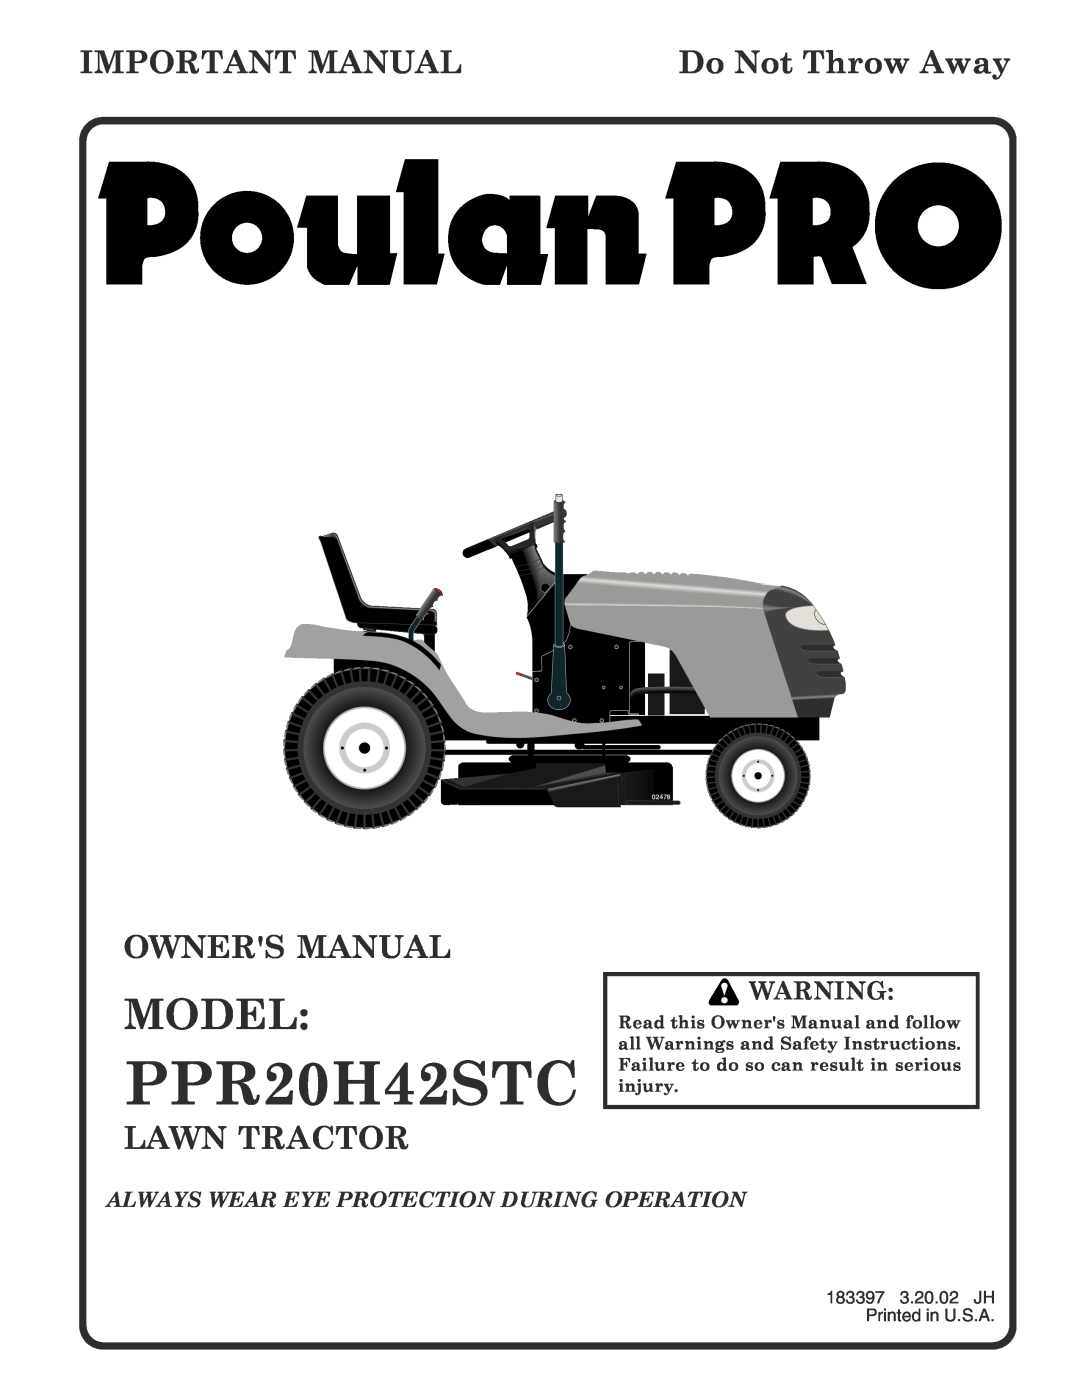 Poulan PPR20H42STC owner manual Model, Important Manual, Do Not Throw Away, Lawn Tractor, 02478 